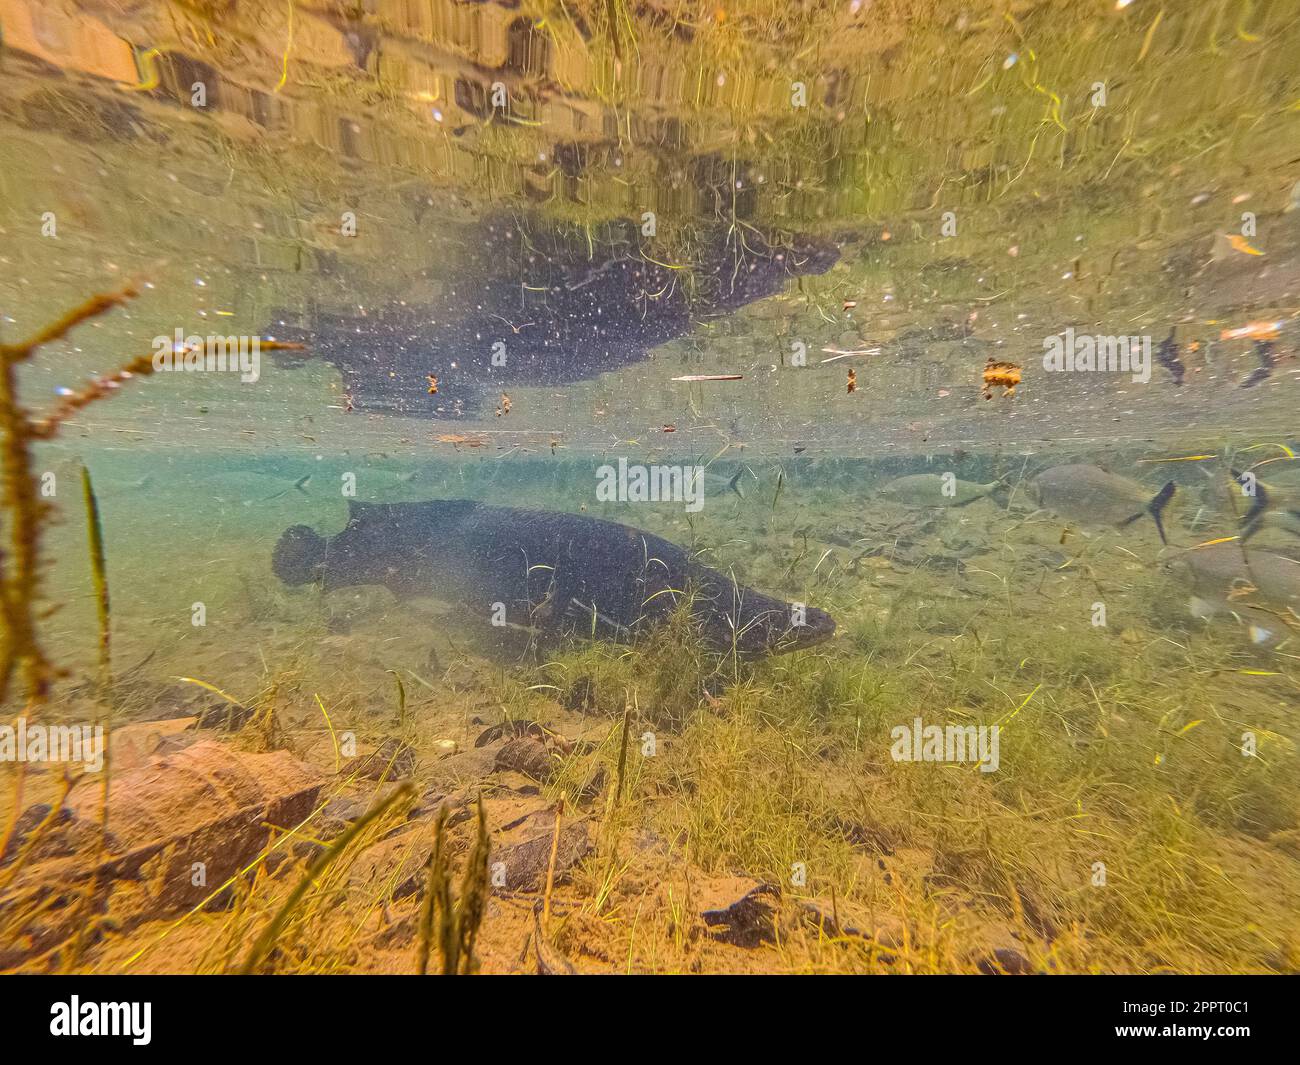 Big tropical fish swimming in a clear river with mirror reflection on the water surface, Amazon rainforest, San Jose do Rio Claro, Mato Grosso, Brazil Stock Photo